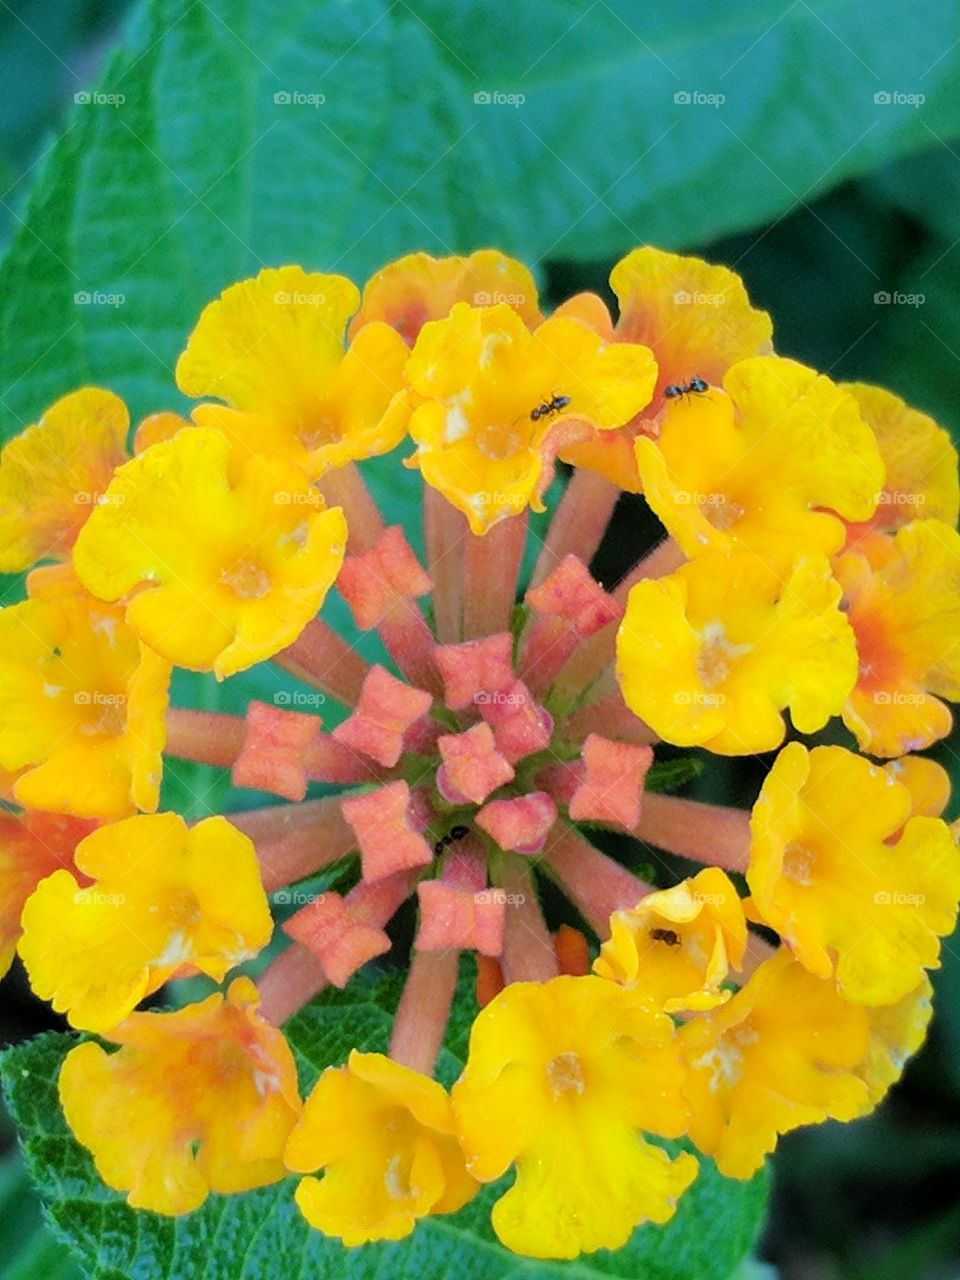 lantana being explored by ants